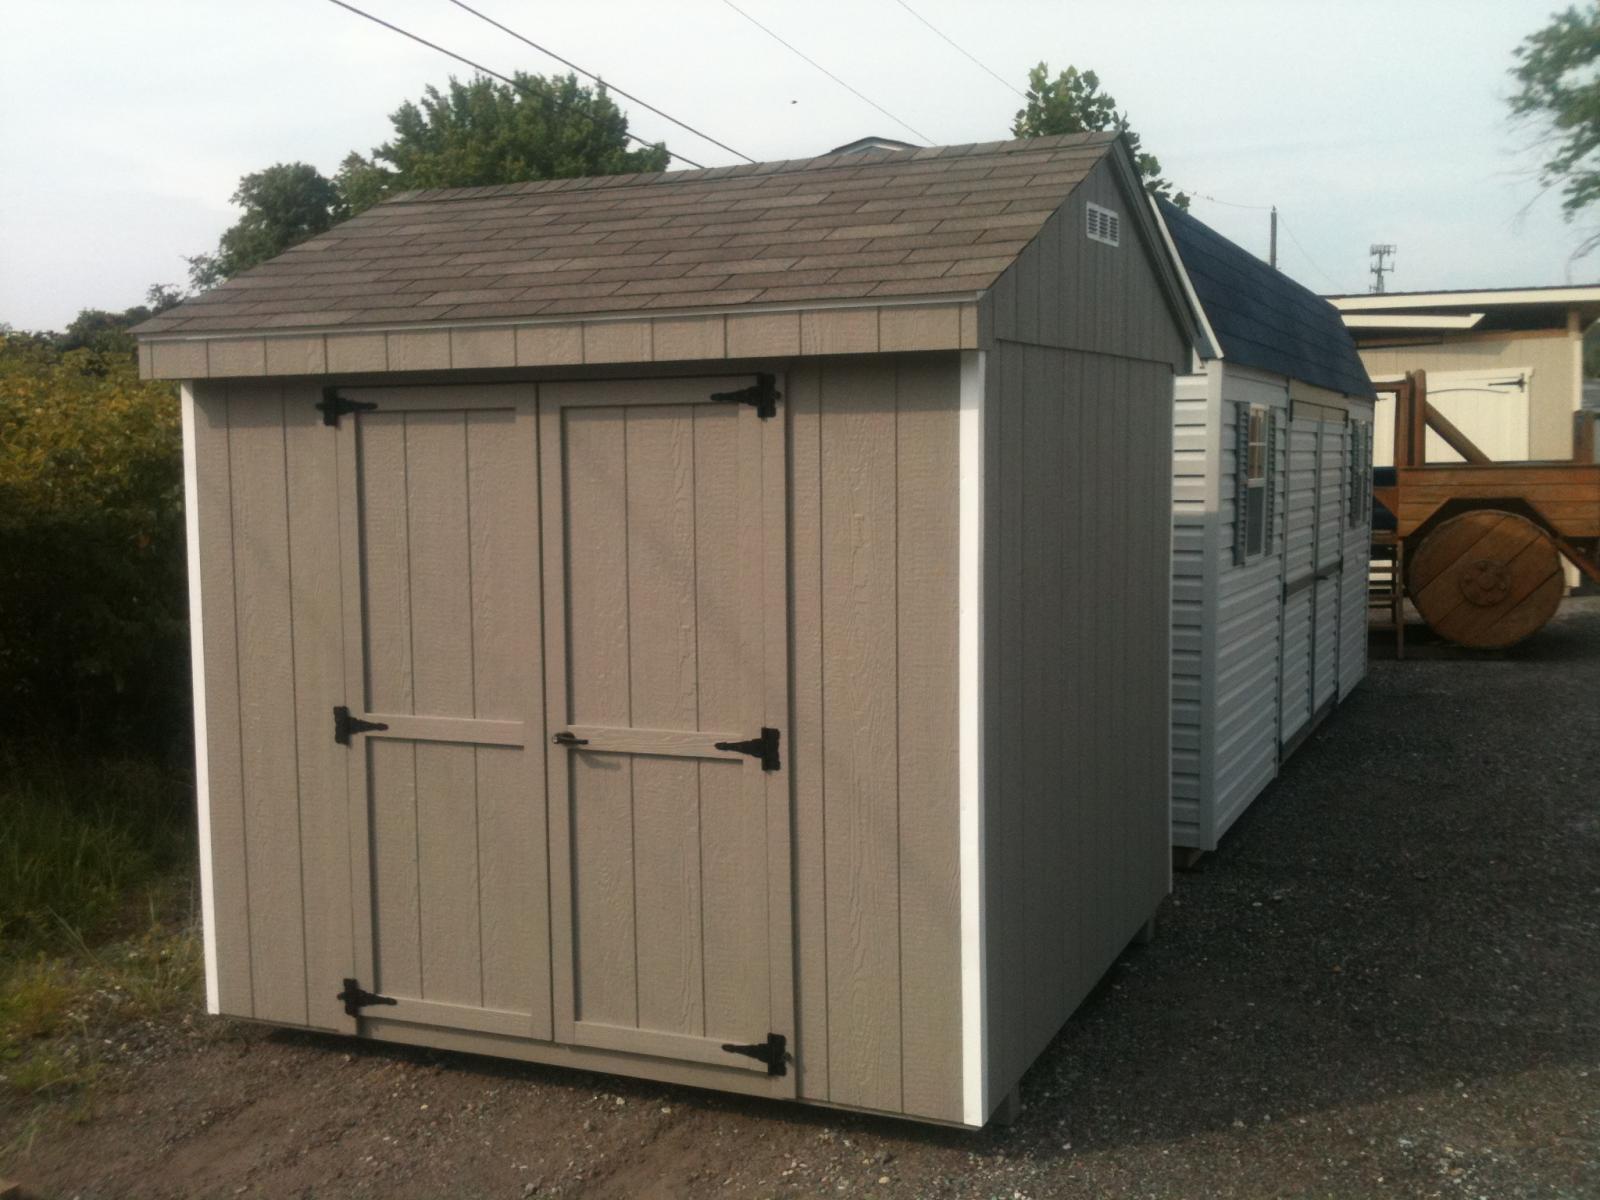 Economy Cottage Shed with tan wood siding, brown asphalt roofing, and white trim.